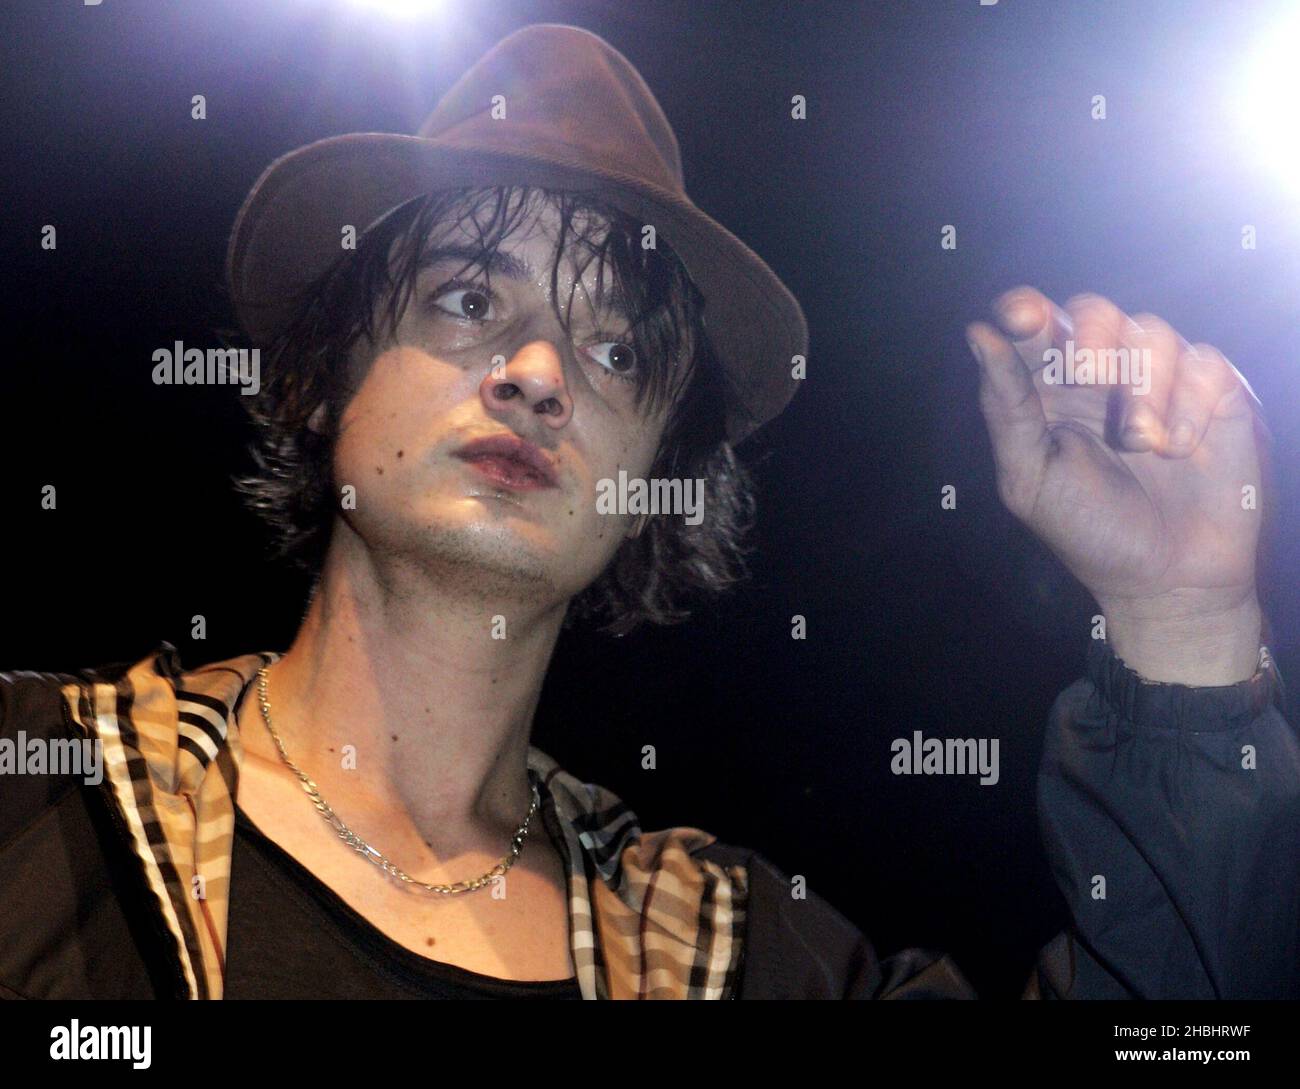 Pete Doherty of Babyshambles performing live on stage at Shepherds Bush Empire in London. Stock Photo